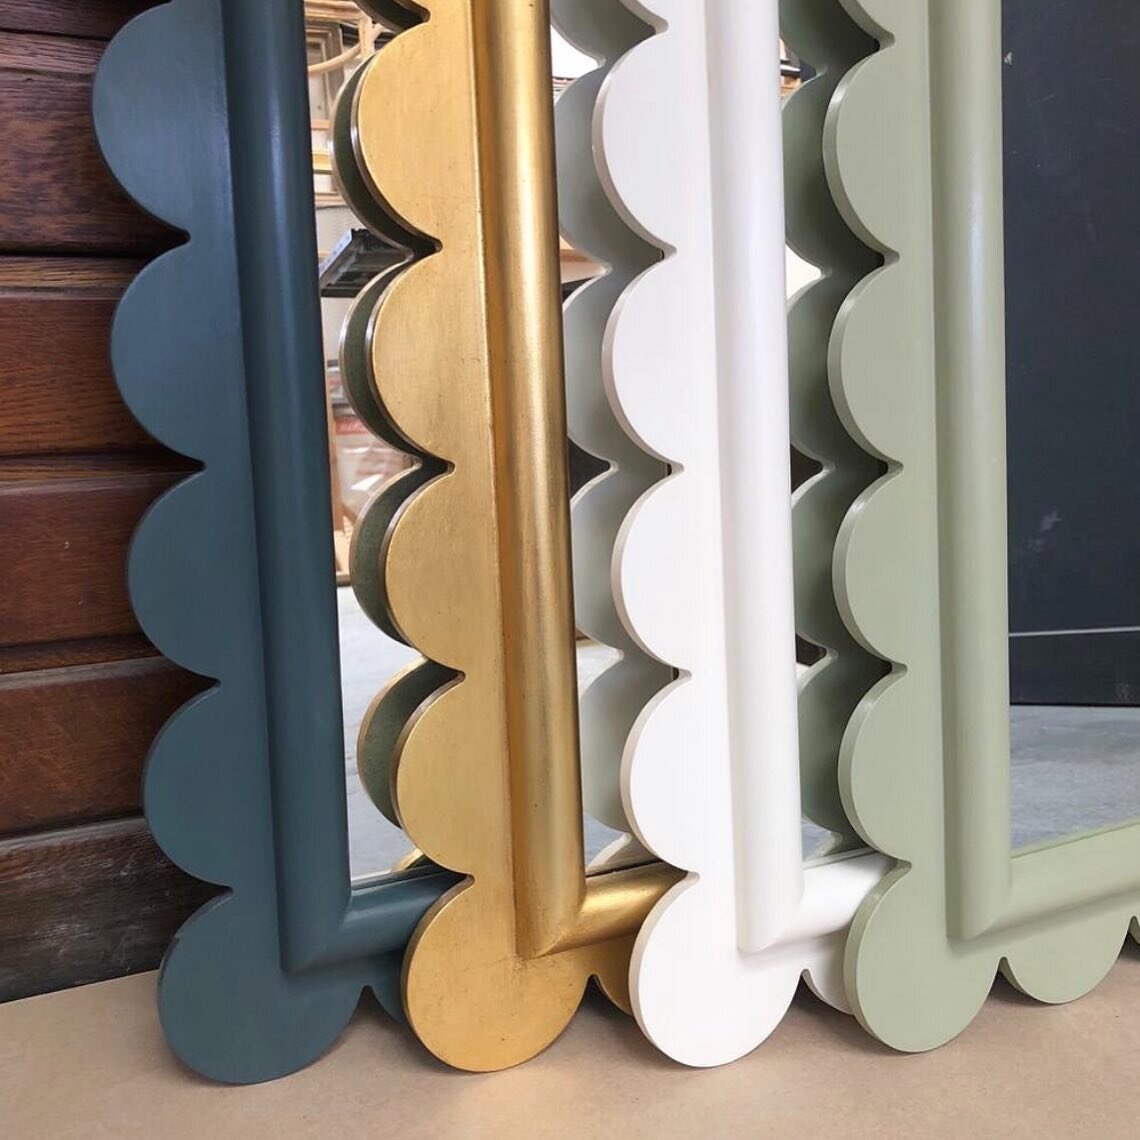 Our Architects Eggshell is a low sheen, water based eggshell, perfect for interior woodwork. Clean White looking 🤍 here on this @reidandwright mirror. 
.
Are you uncertain on which finish to use? Call us on 020 7823 7755 to ask any queries you might